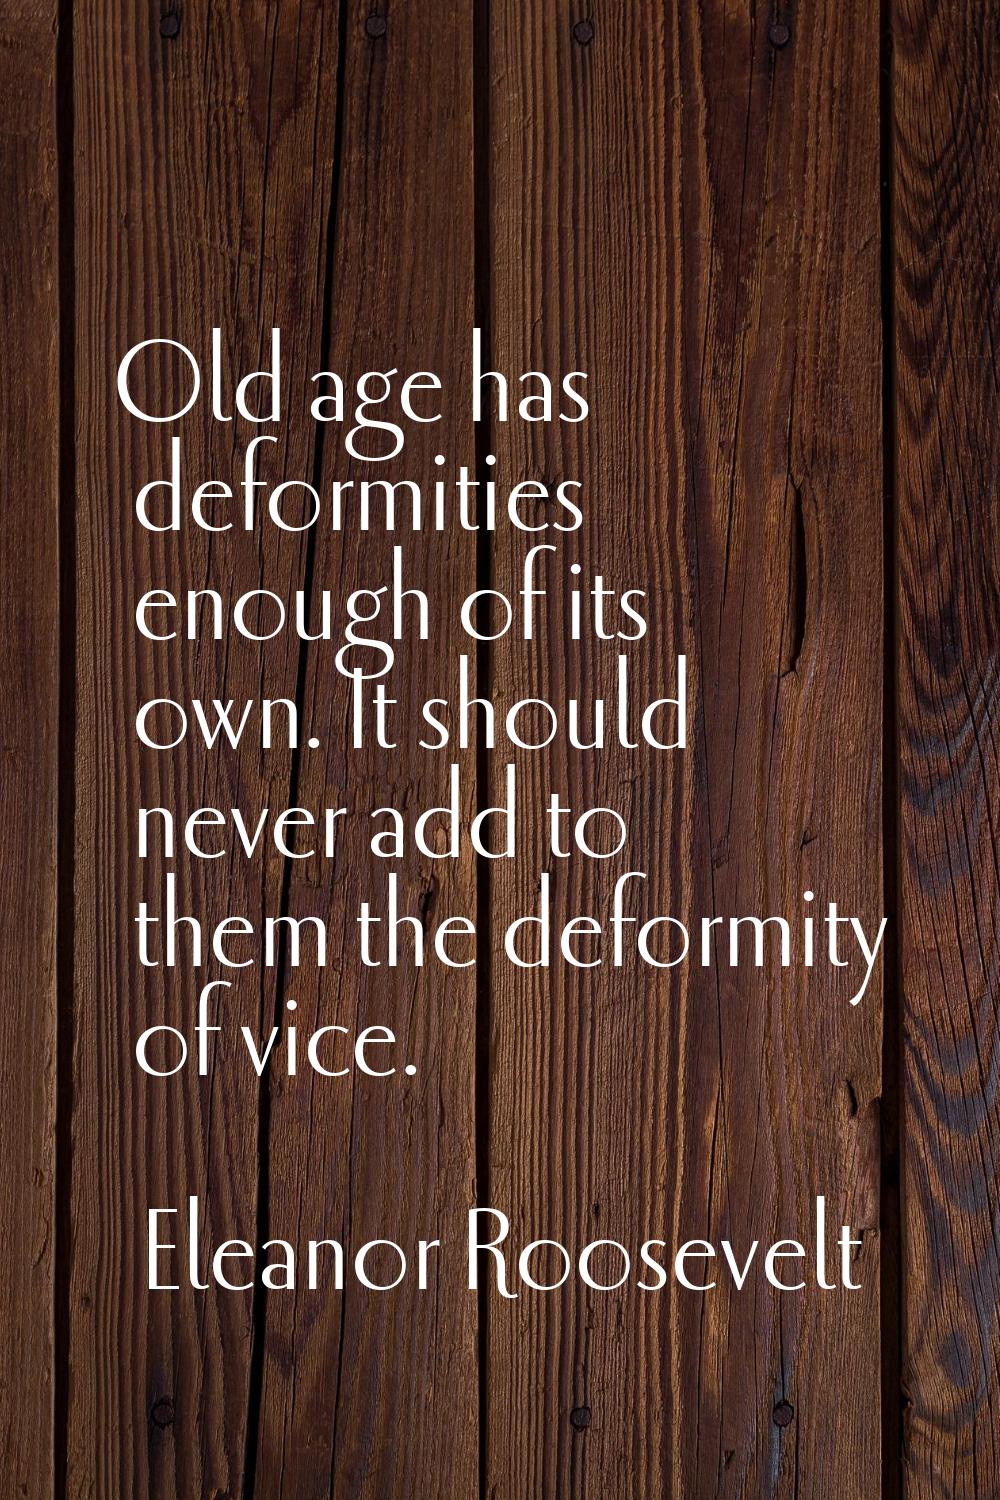 Old age has deformities enough of its own. It should never add to them the deformity of vice.